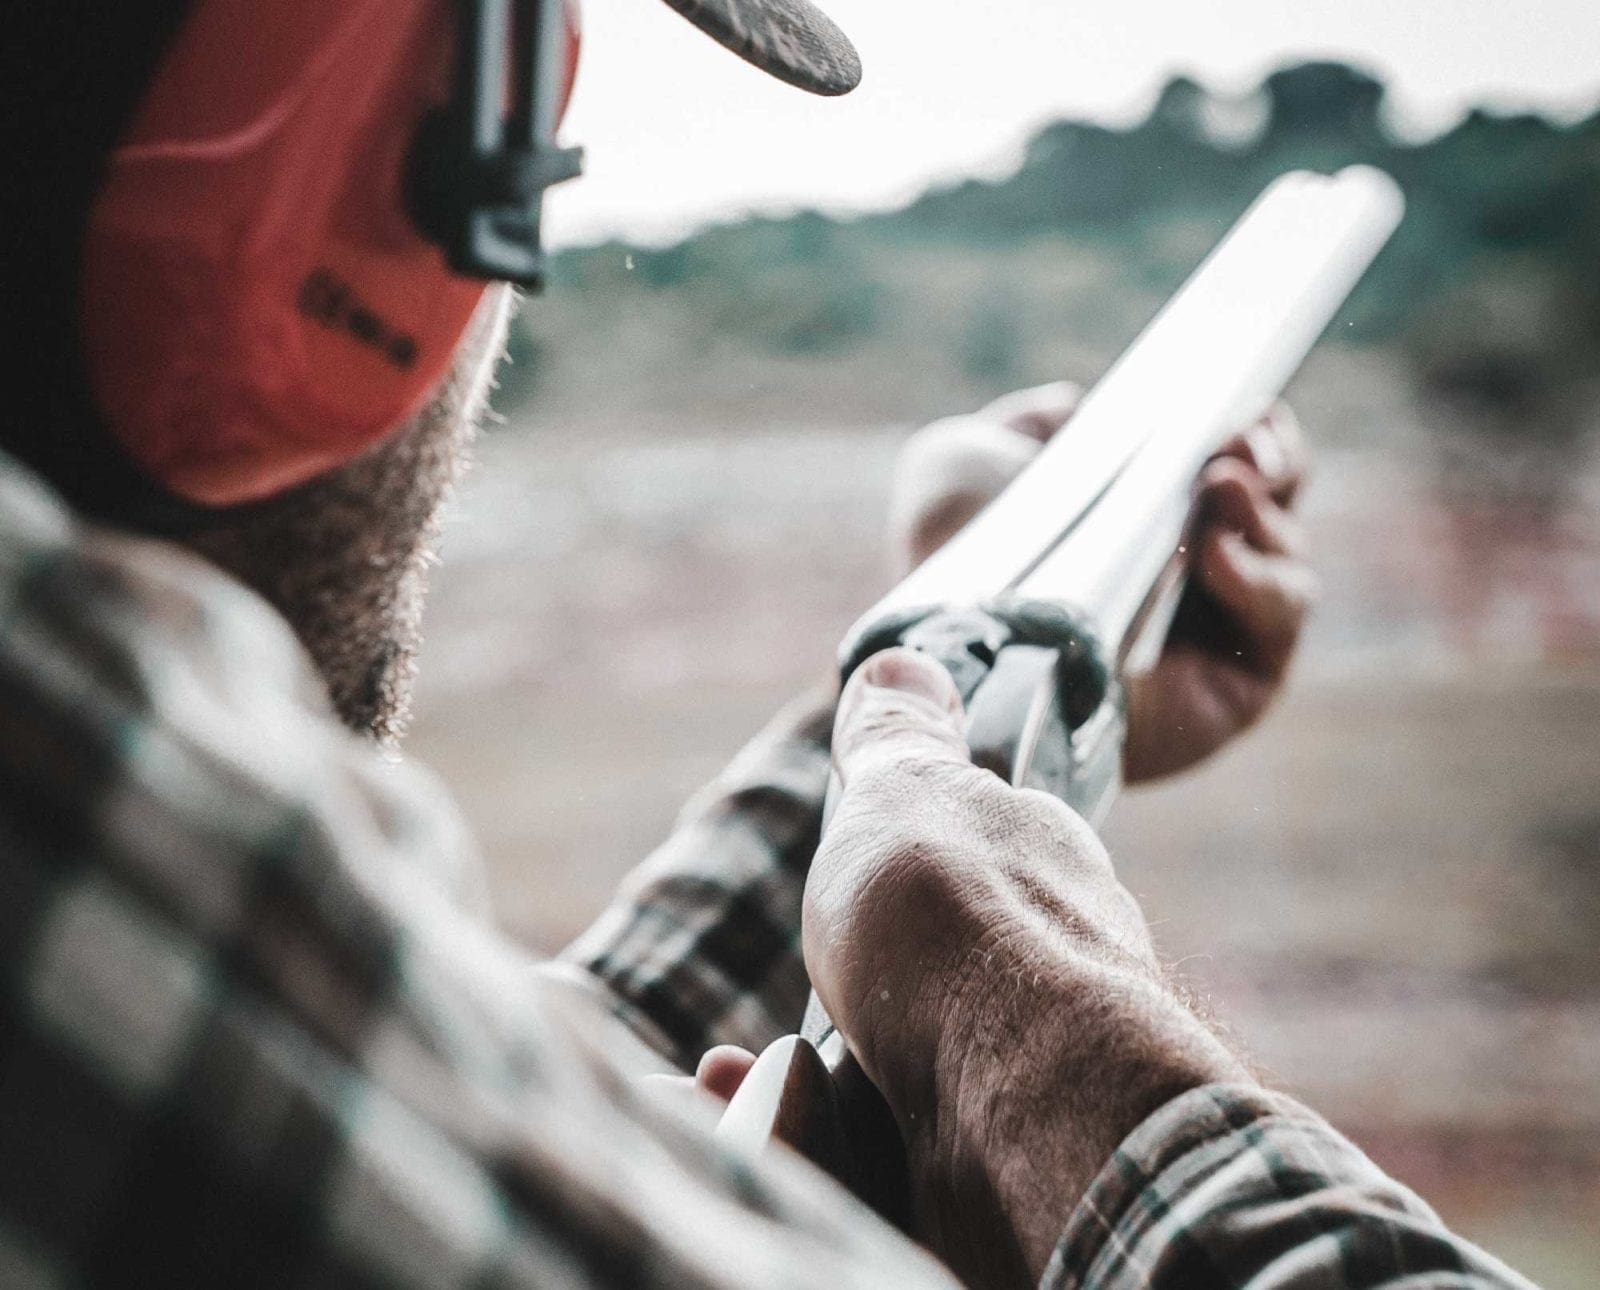 A wingshooter practices the Churchill method on a sporting clays range.